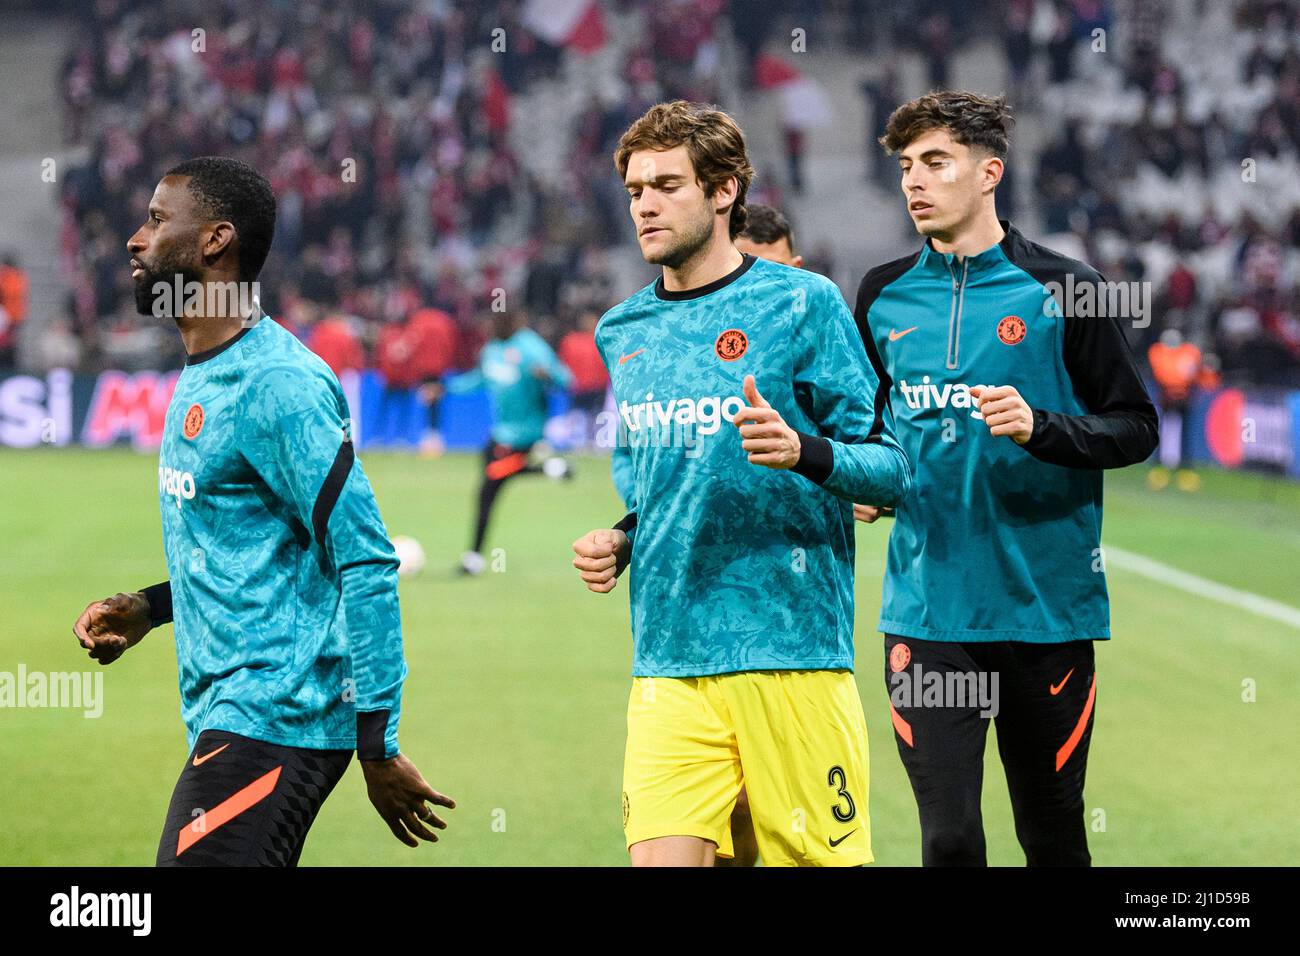 Lille, France - March 16: Andreas Christensen of Chelsea (C) warming up during the UEFA Champions League Round Of Sixteen Leg Two match between Lille Stock Photo